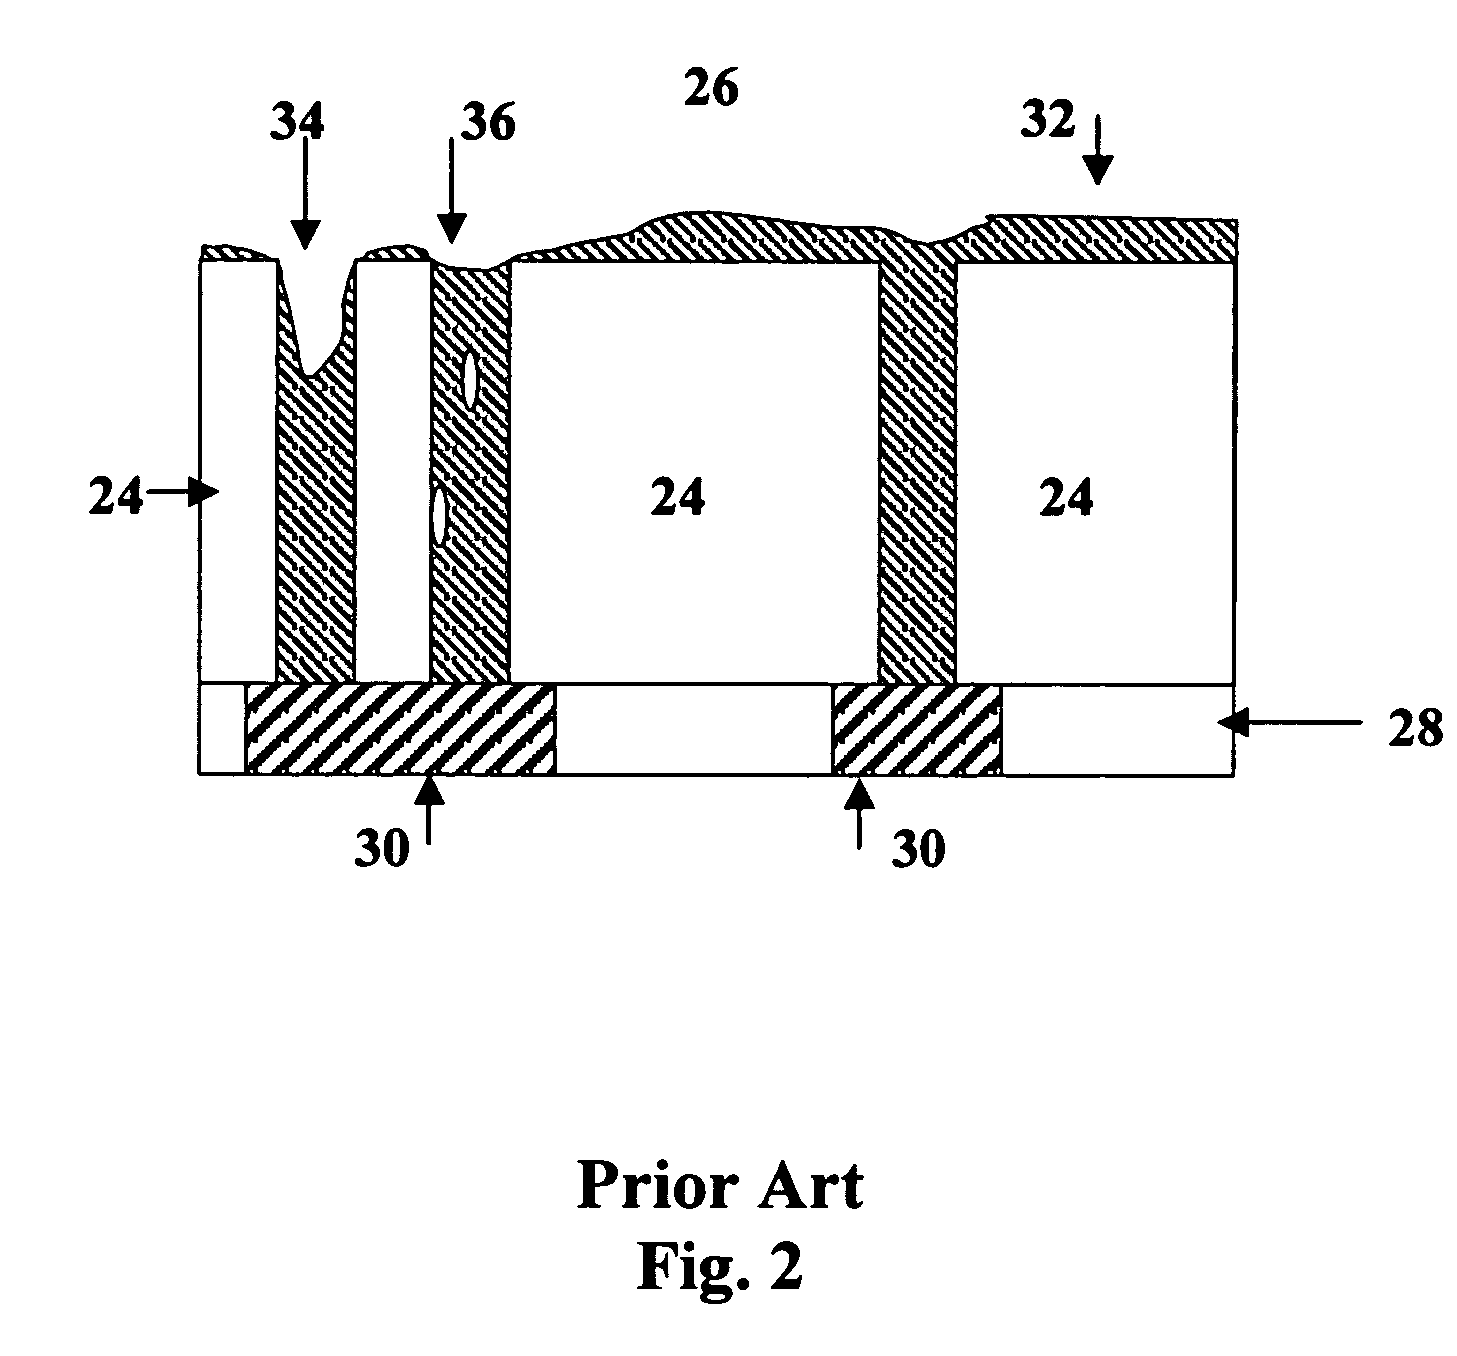 Developer-soluble materials and methods of using the same in via-first dual damascene applications